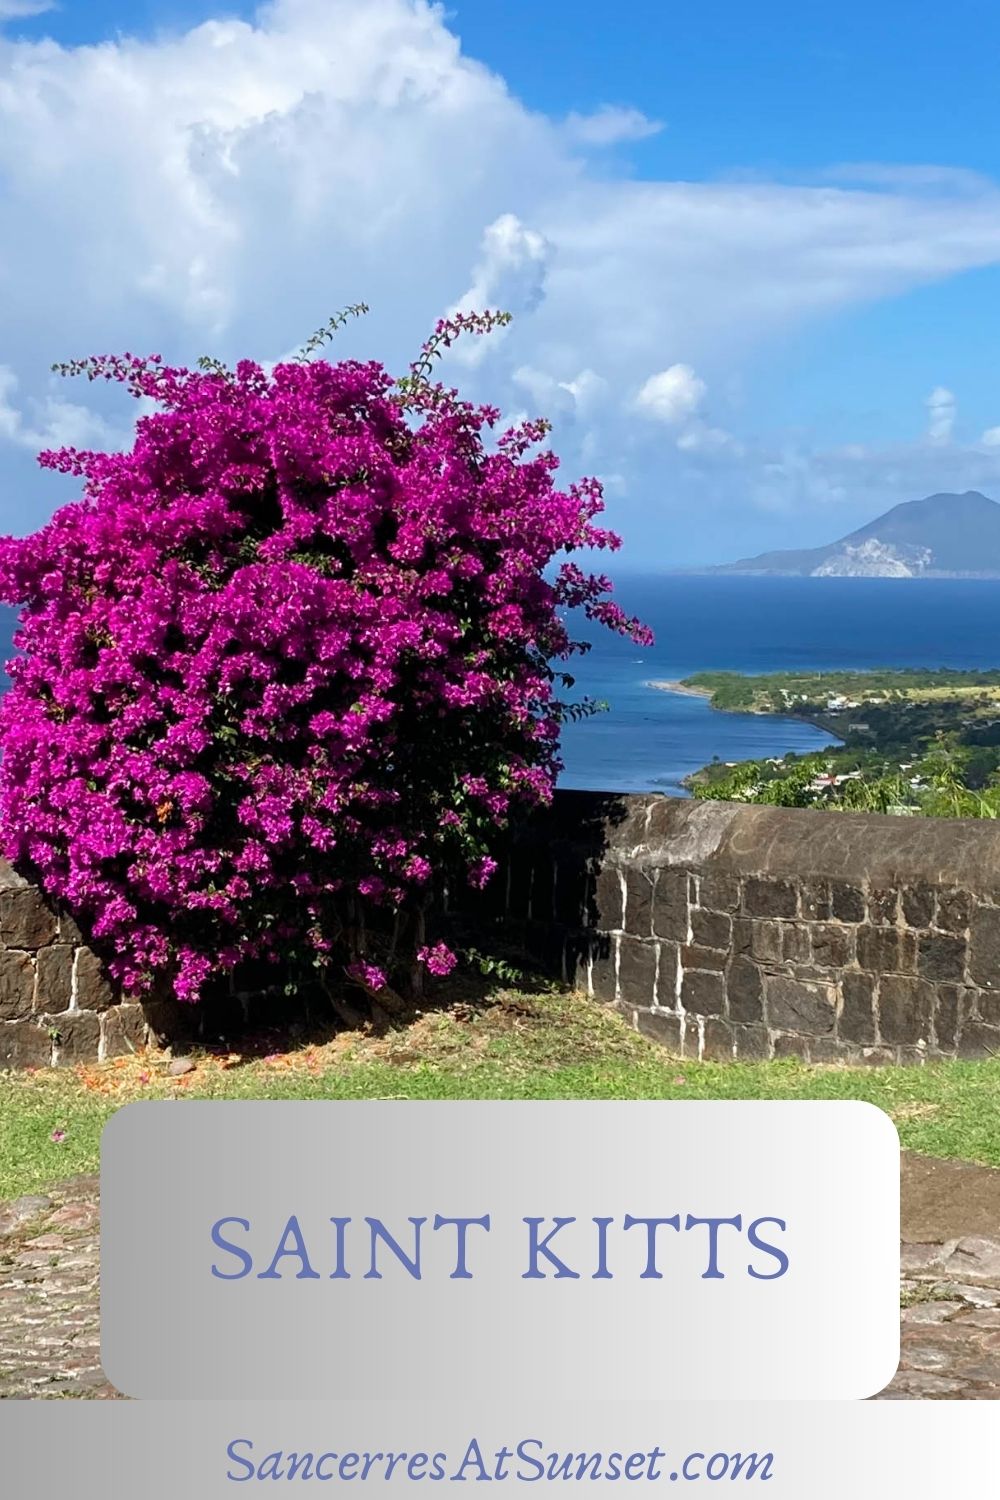 A Day on Saint Kitts